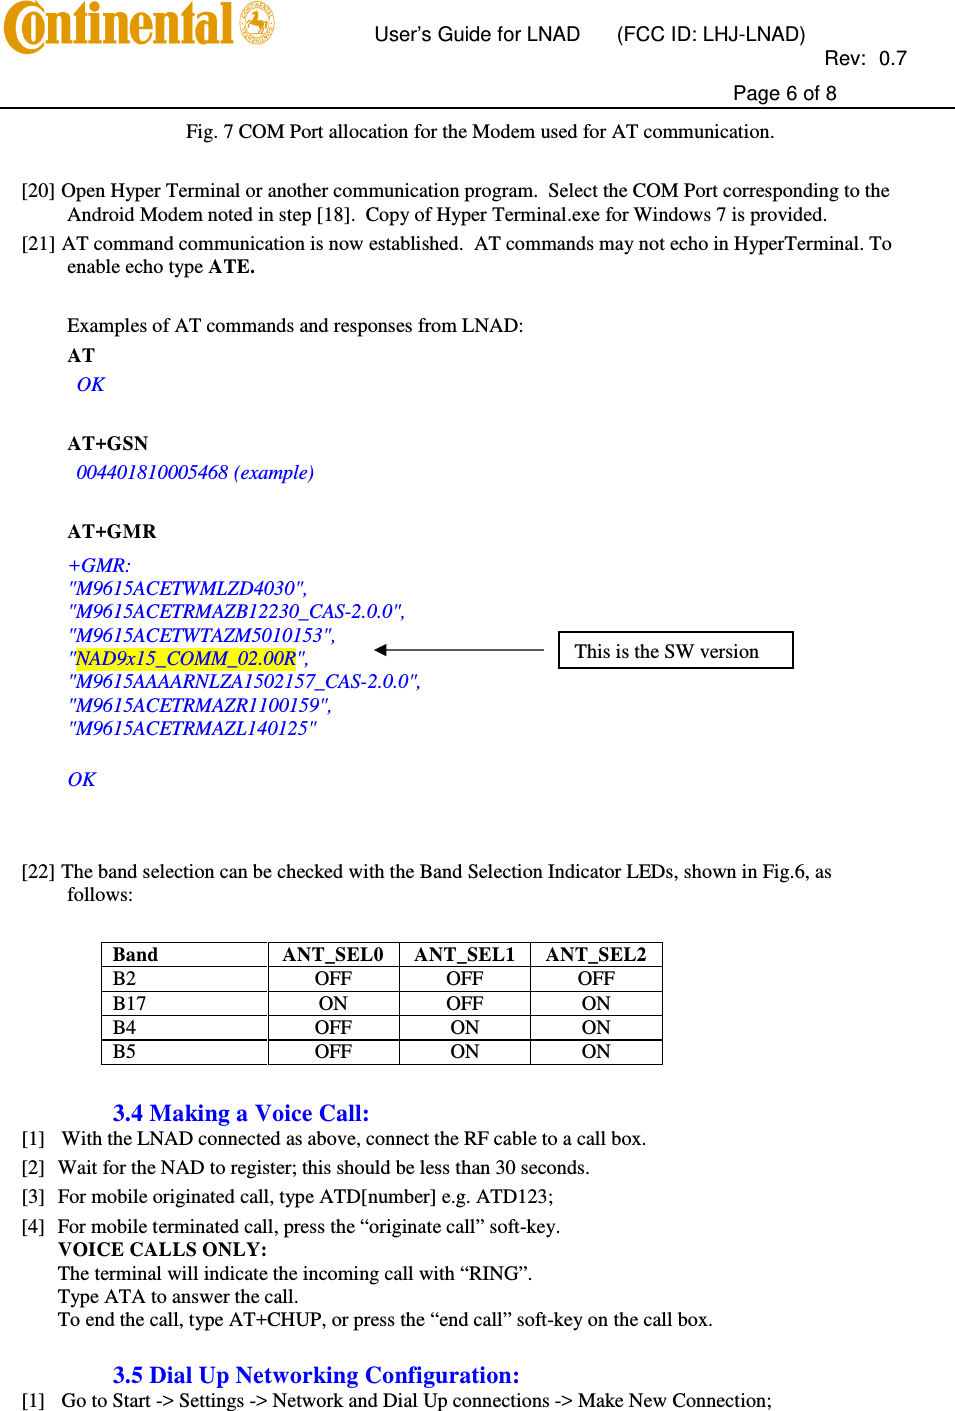       User’s Guide for LNAD  (FCC ID: LHJ-LNAD)          Rev:  0.7     Page 6 of 8  Fig. 7 COM Port allocation for the Modem used for AT communication.  [20] Open Hyper Terminal or another communication program.  Select the COM Port corresponding to the Android Modem noted in step [18].  Copy of Hyper Terminal.exe for Windows 7 is provided. [21] AT command communication is now established.  AT commands may not echo in HyperTerminal. To enable echo type ATE.  Examples of AT commands and responses from LNAD: AT  OK  AT+GSN  004401810005468 (example)  AT+GMR +GMR: &quot;M9615ACETWMLZD4030&quot;, &quot;M9615ACETRMAZB12230_CAS-2.0.0&quot;, &quot;M9615ACETWTAZM5010153&quot;, &quot;NAD9x15_COMM_02.00R&quot;, &quot;M9615AAAARNLZA1502157_CAS-2.0.0&quot;, &quot;M9615ACETRMAZR1100159&quot;, &quot;M9615ACETRMAZL140125&quot;  OK    [22] The band selection can be checked with the Band Selection Indicator LEDs, shown in Fig.6, as follows:  Band  ANT_SEL0  ANT_SEL1  ANT_SEL2 B2   OFF  OFF  OFF B17  ON  OFF  ON B4  OFF  ON  ON B5   OFF  ON  ON  3.4 Making a Voice Call: [1] With the LNAD connected as above, connect the RF cable to a call box. [2] Wait for the NAD to register; this should be less than 30 seconds. [3] For mobile originated call, type ATD[number] e.g. ATD123; [4] For mobile terminated call, press the “originate call” soft-key. VOICE CALLS ONLY: The terminal will indicate the incoming call with “RING”. Type ATA to answer the call. To end the call, type AT+CHUP, or press the “end call” soft-key on the call box.  3.5 Dial Up Networking Configuration: [1] Go to Start -&gt; Settings -&gt; Network and Dial Up connections -&gt; Make New Connection; This is the SW version 